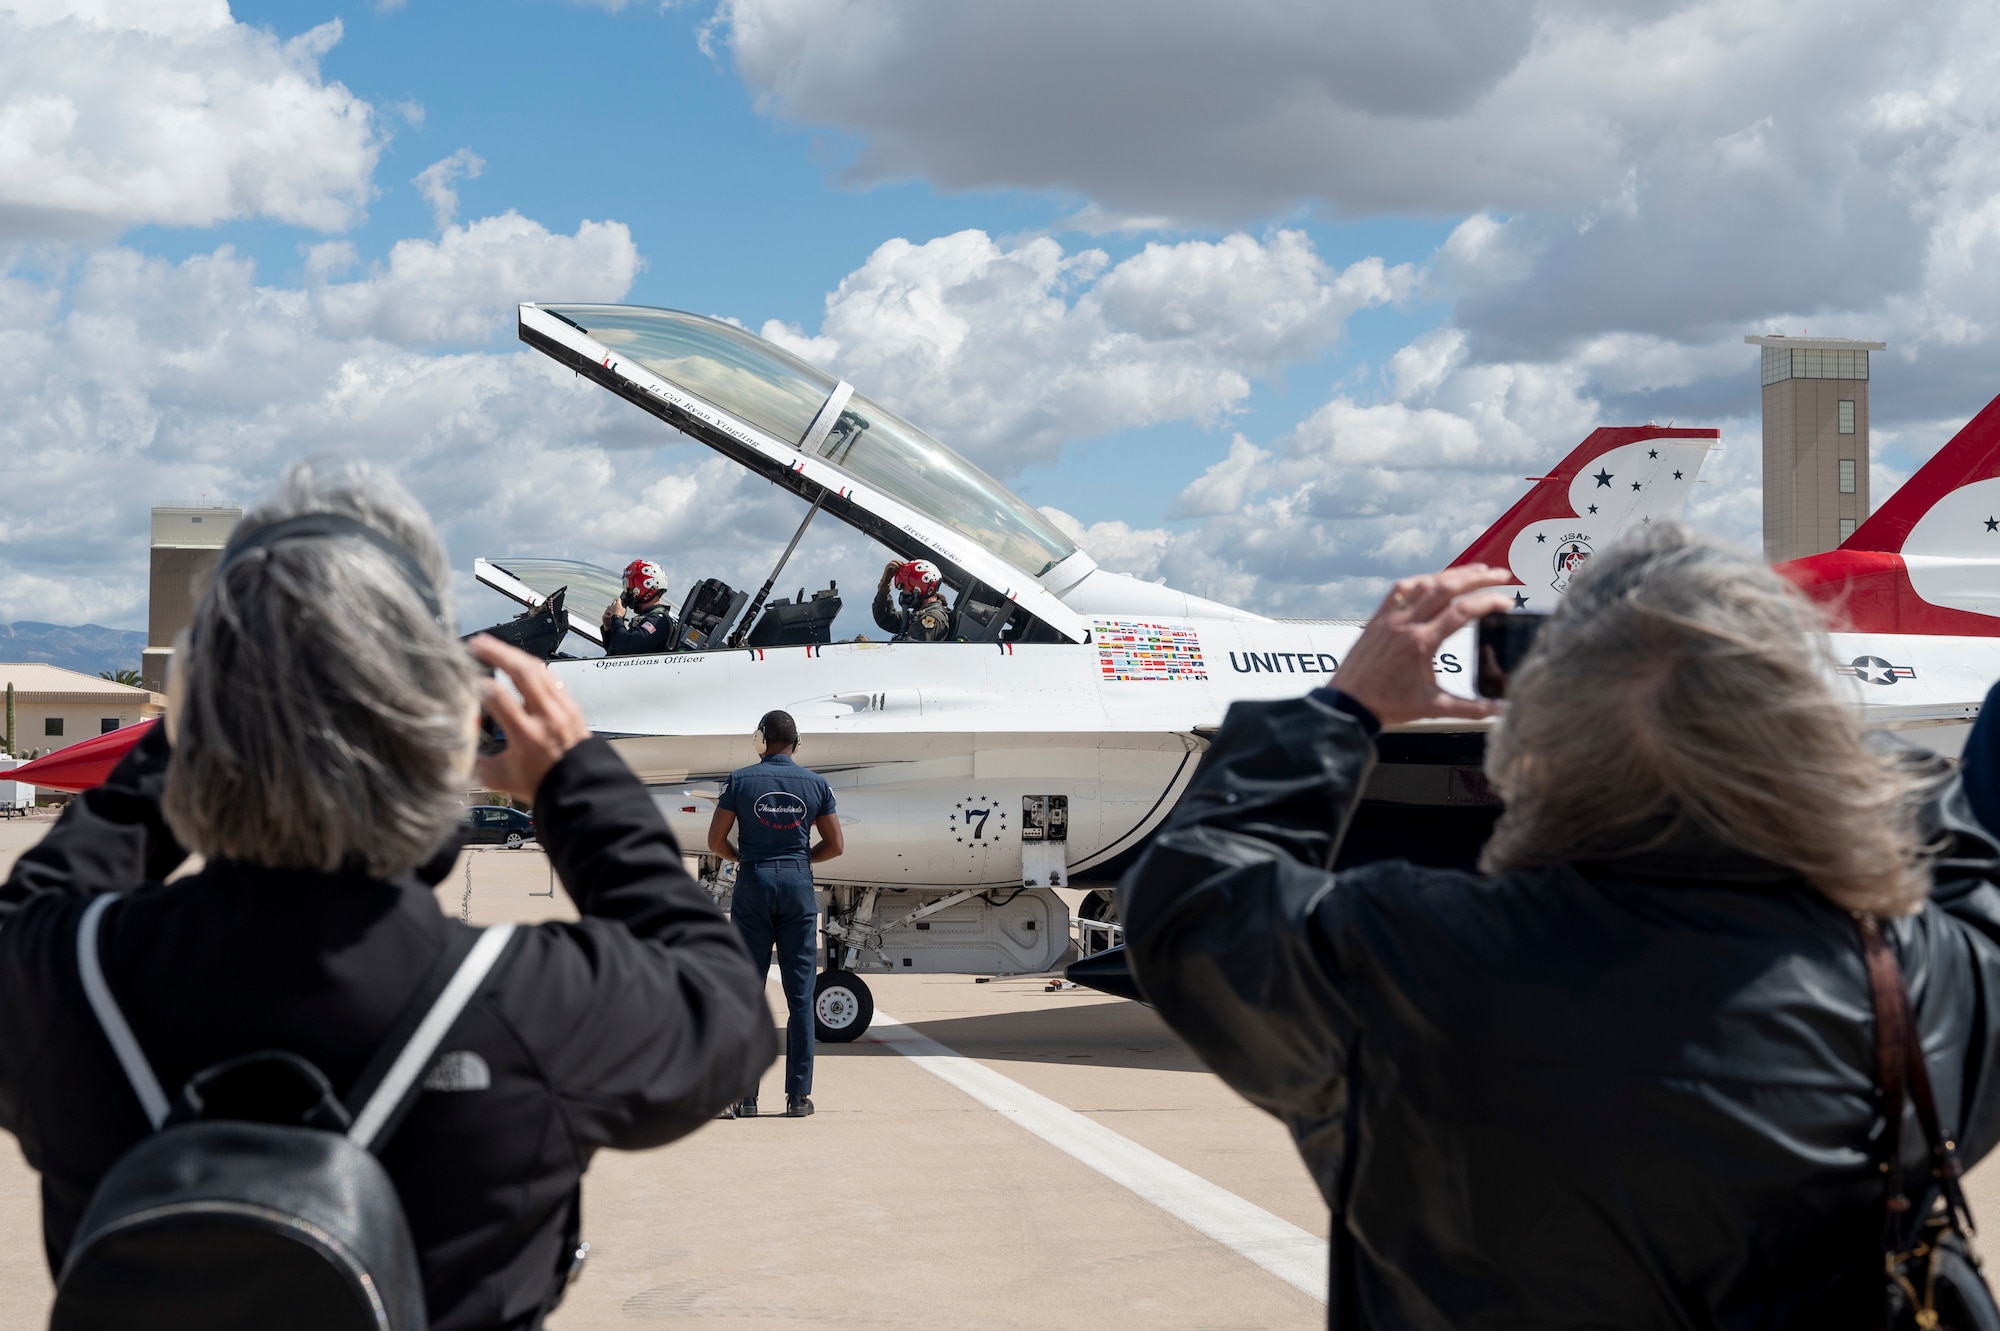 Photo of people in the foreground taking photos of people inside of a jet.